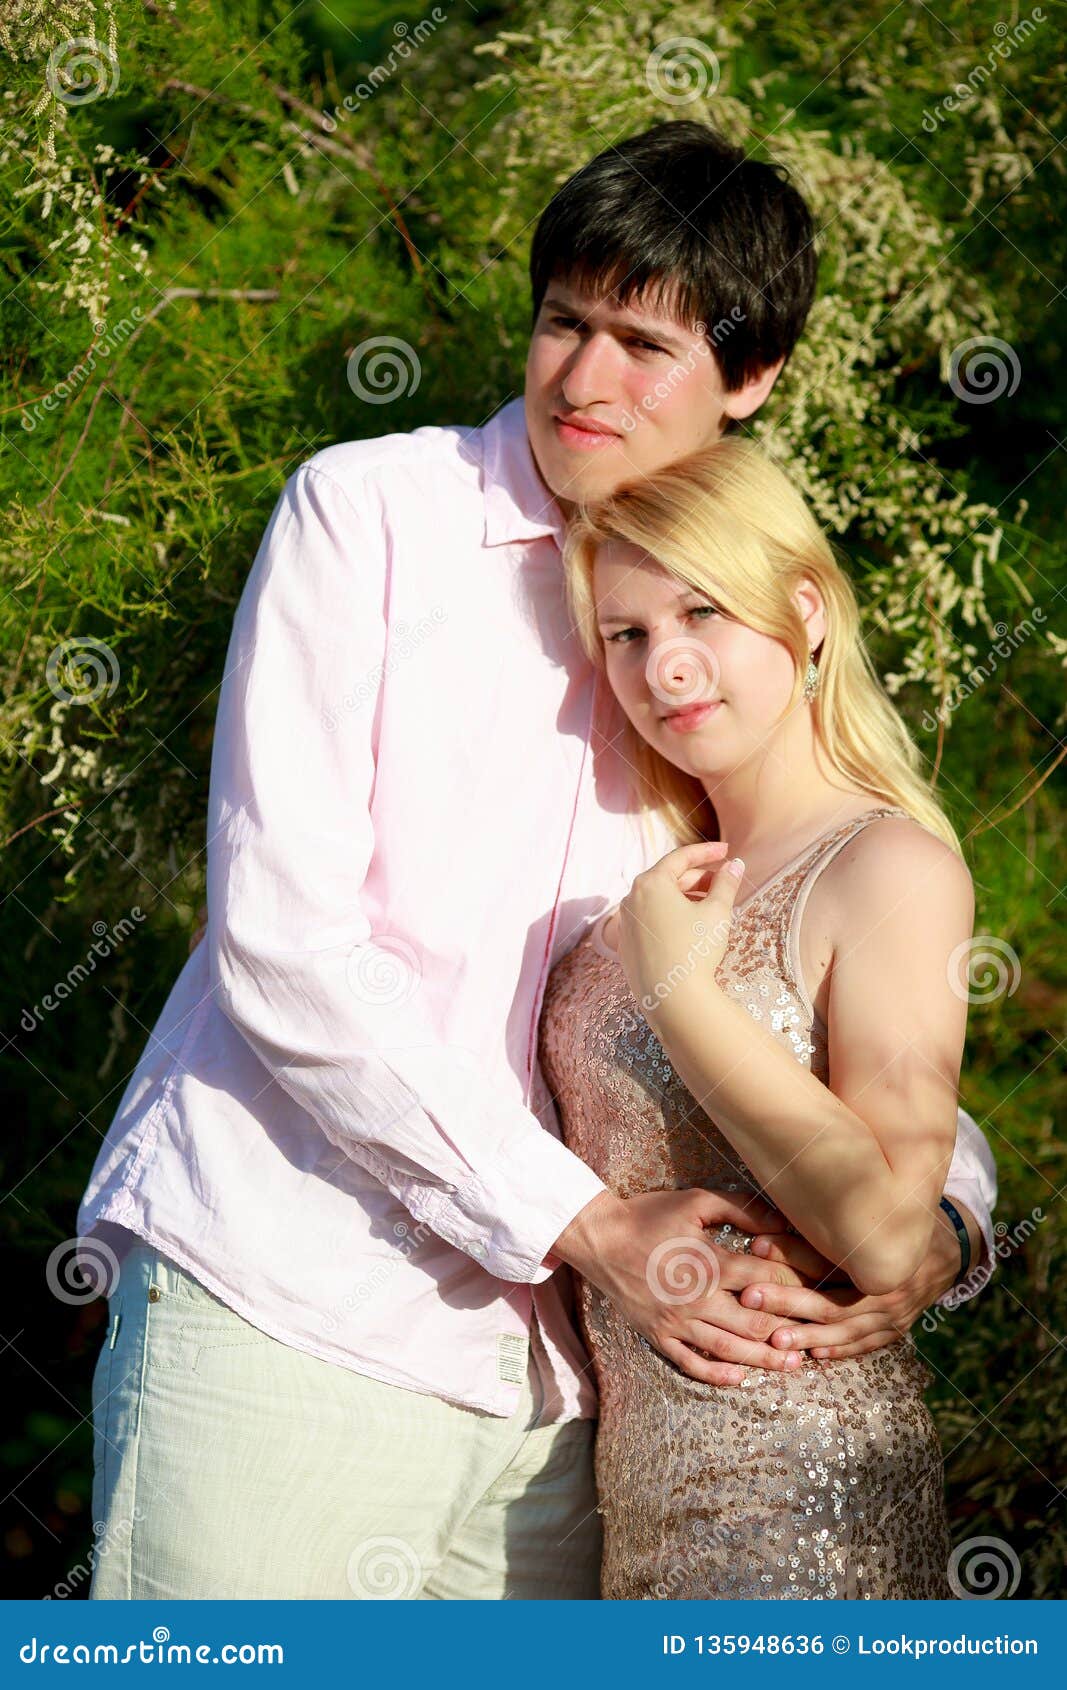 Young Blonde Woman and Man at Romantic Date at Vacation Stock Photo